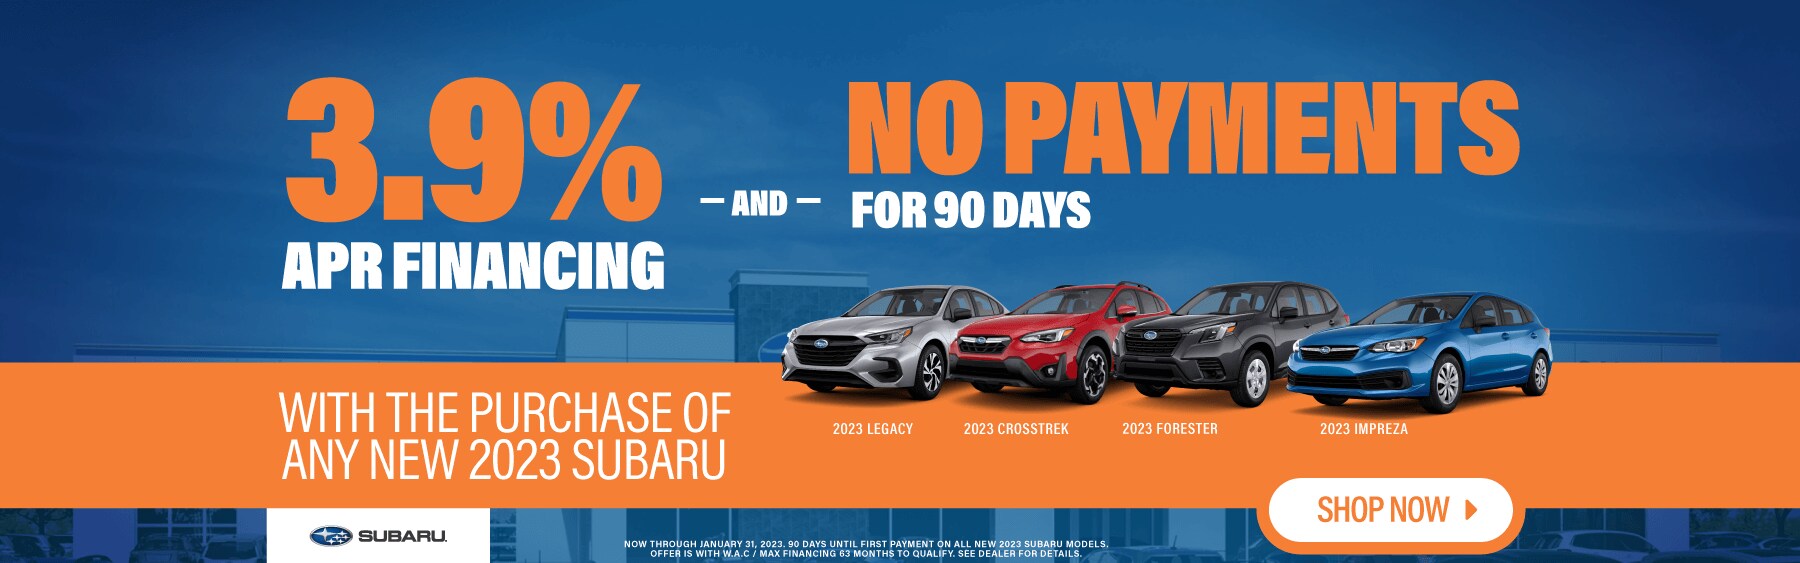 3.9% APR and No Payments For 90 Days on all New 2023 Subarus in Stock